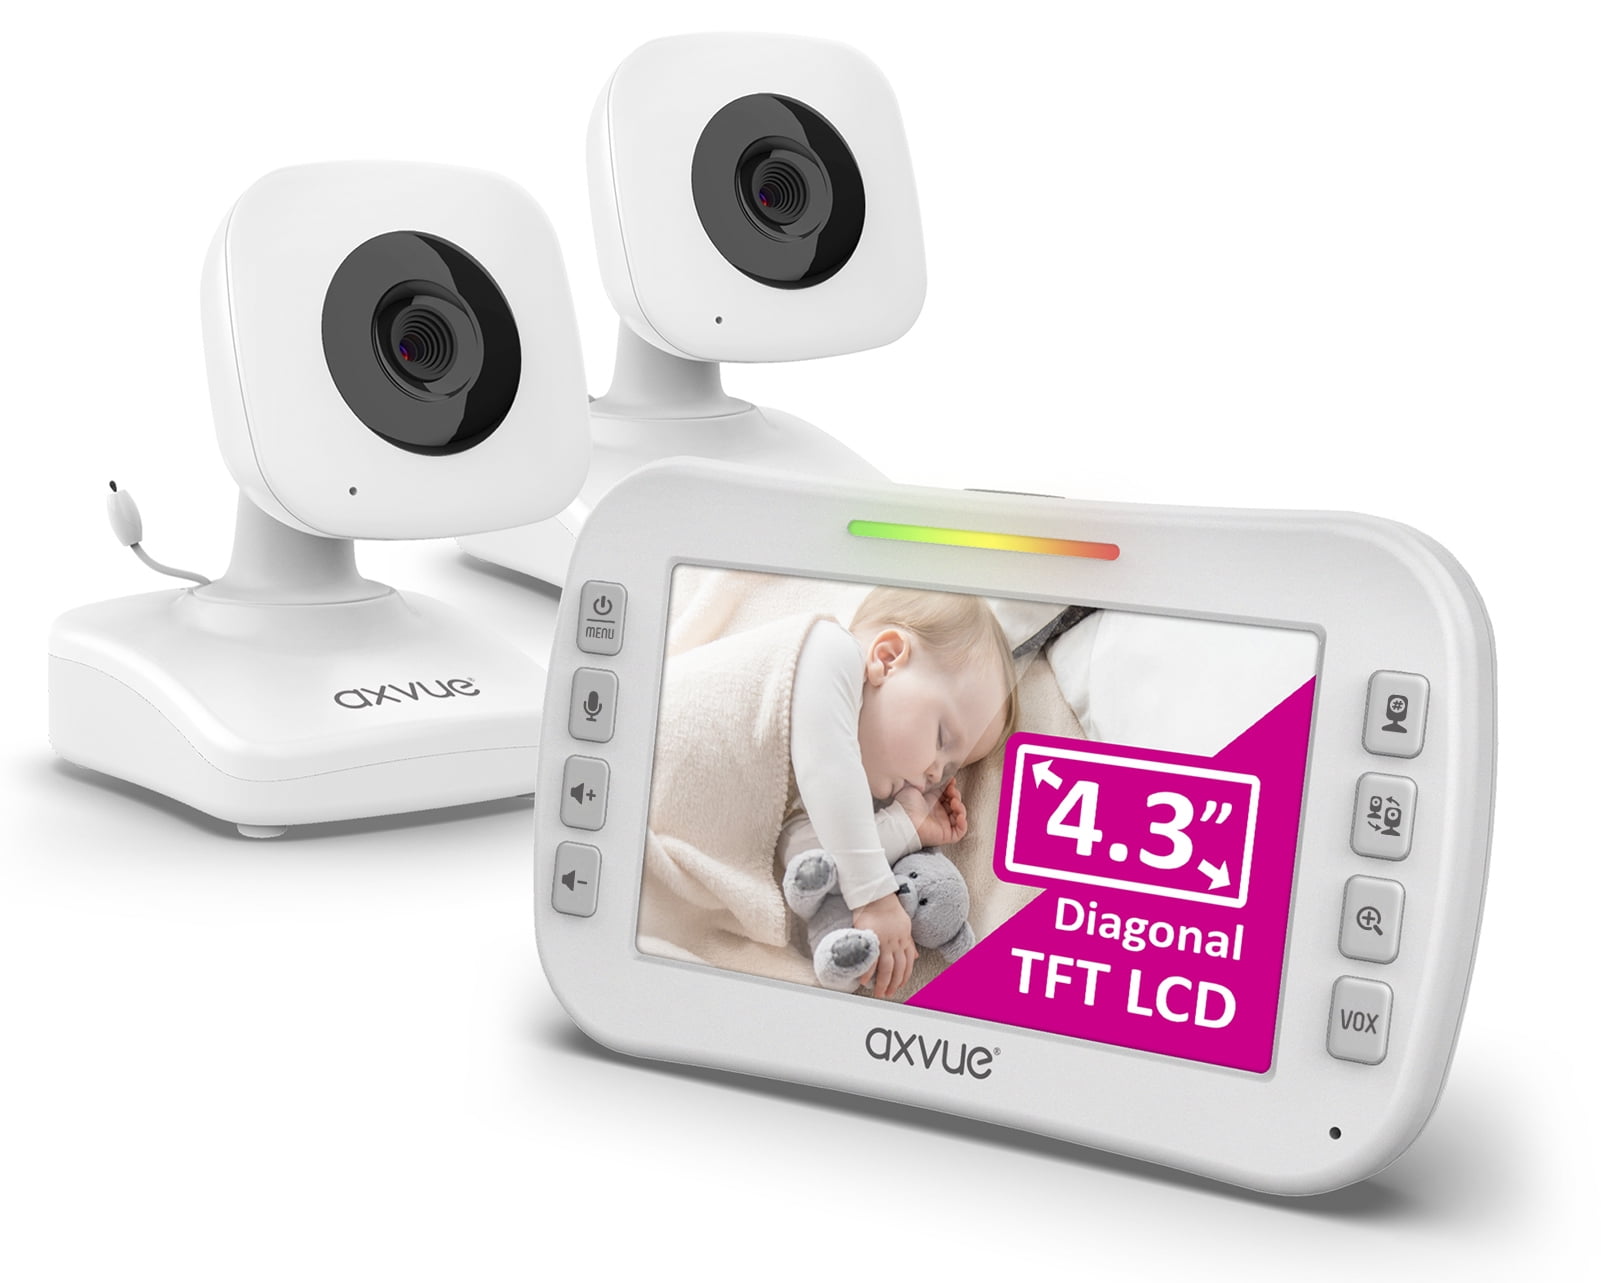 Axvue E612 Video Baby Monitor 4.3" LCD Screen and 2 Camera NEW UNIT